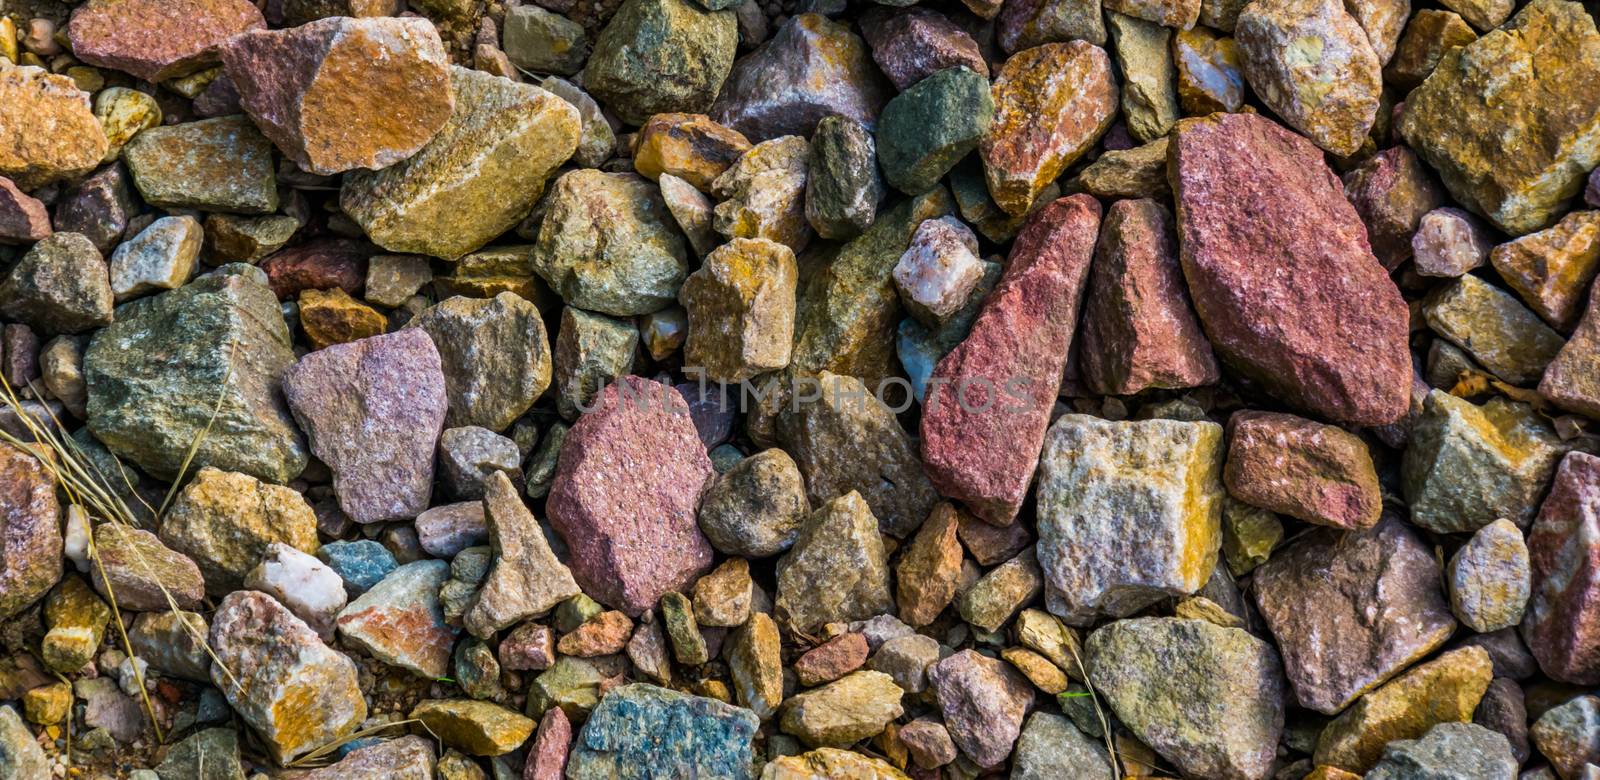 gravel stones in diverse colors in closeup, stone pattern background